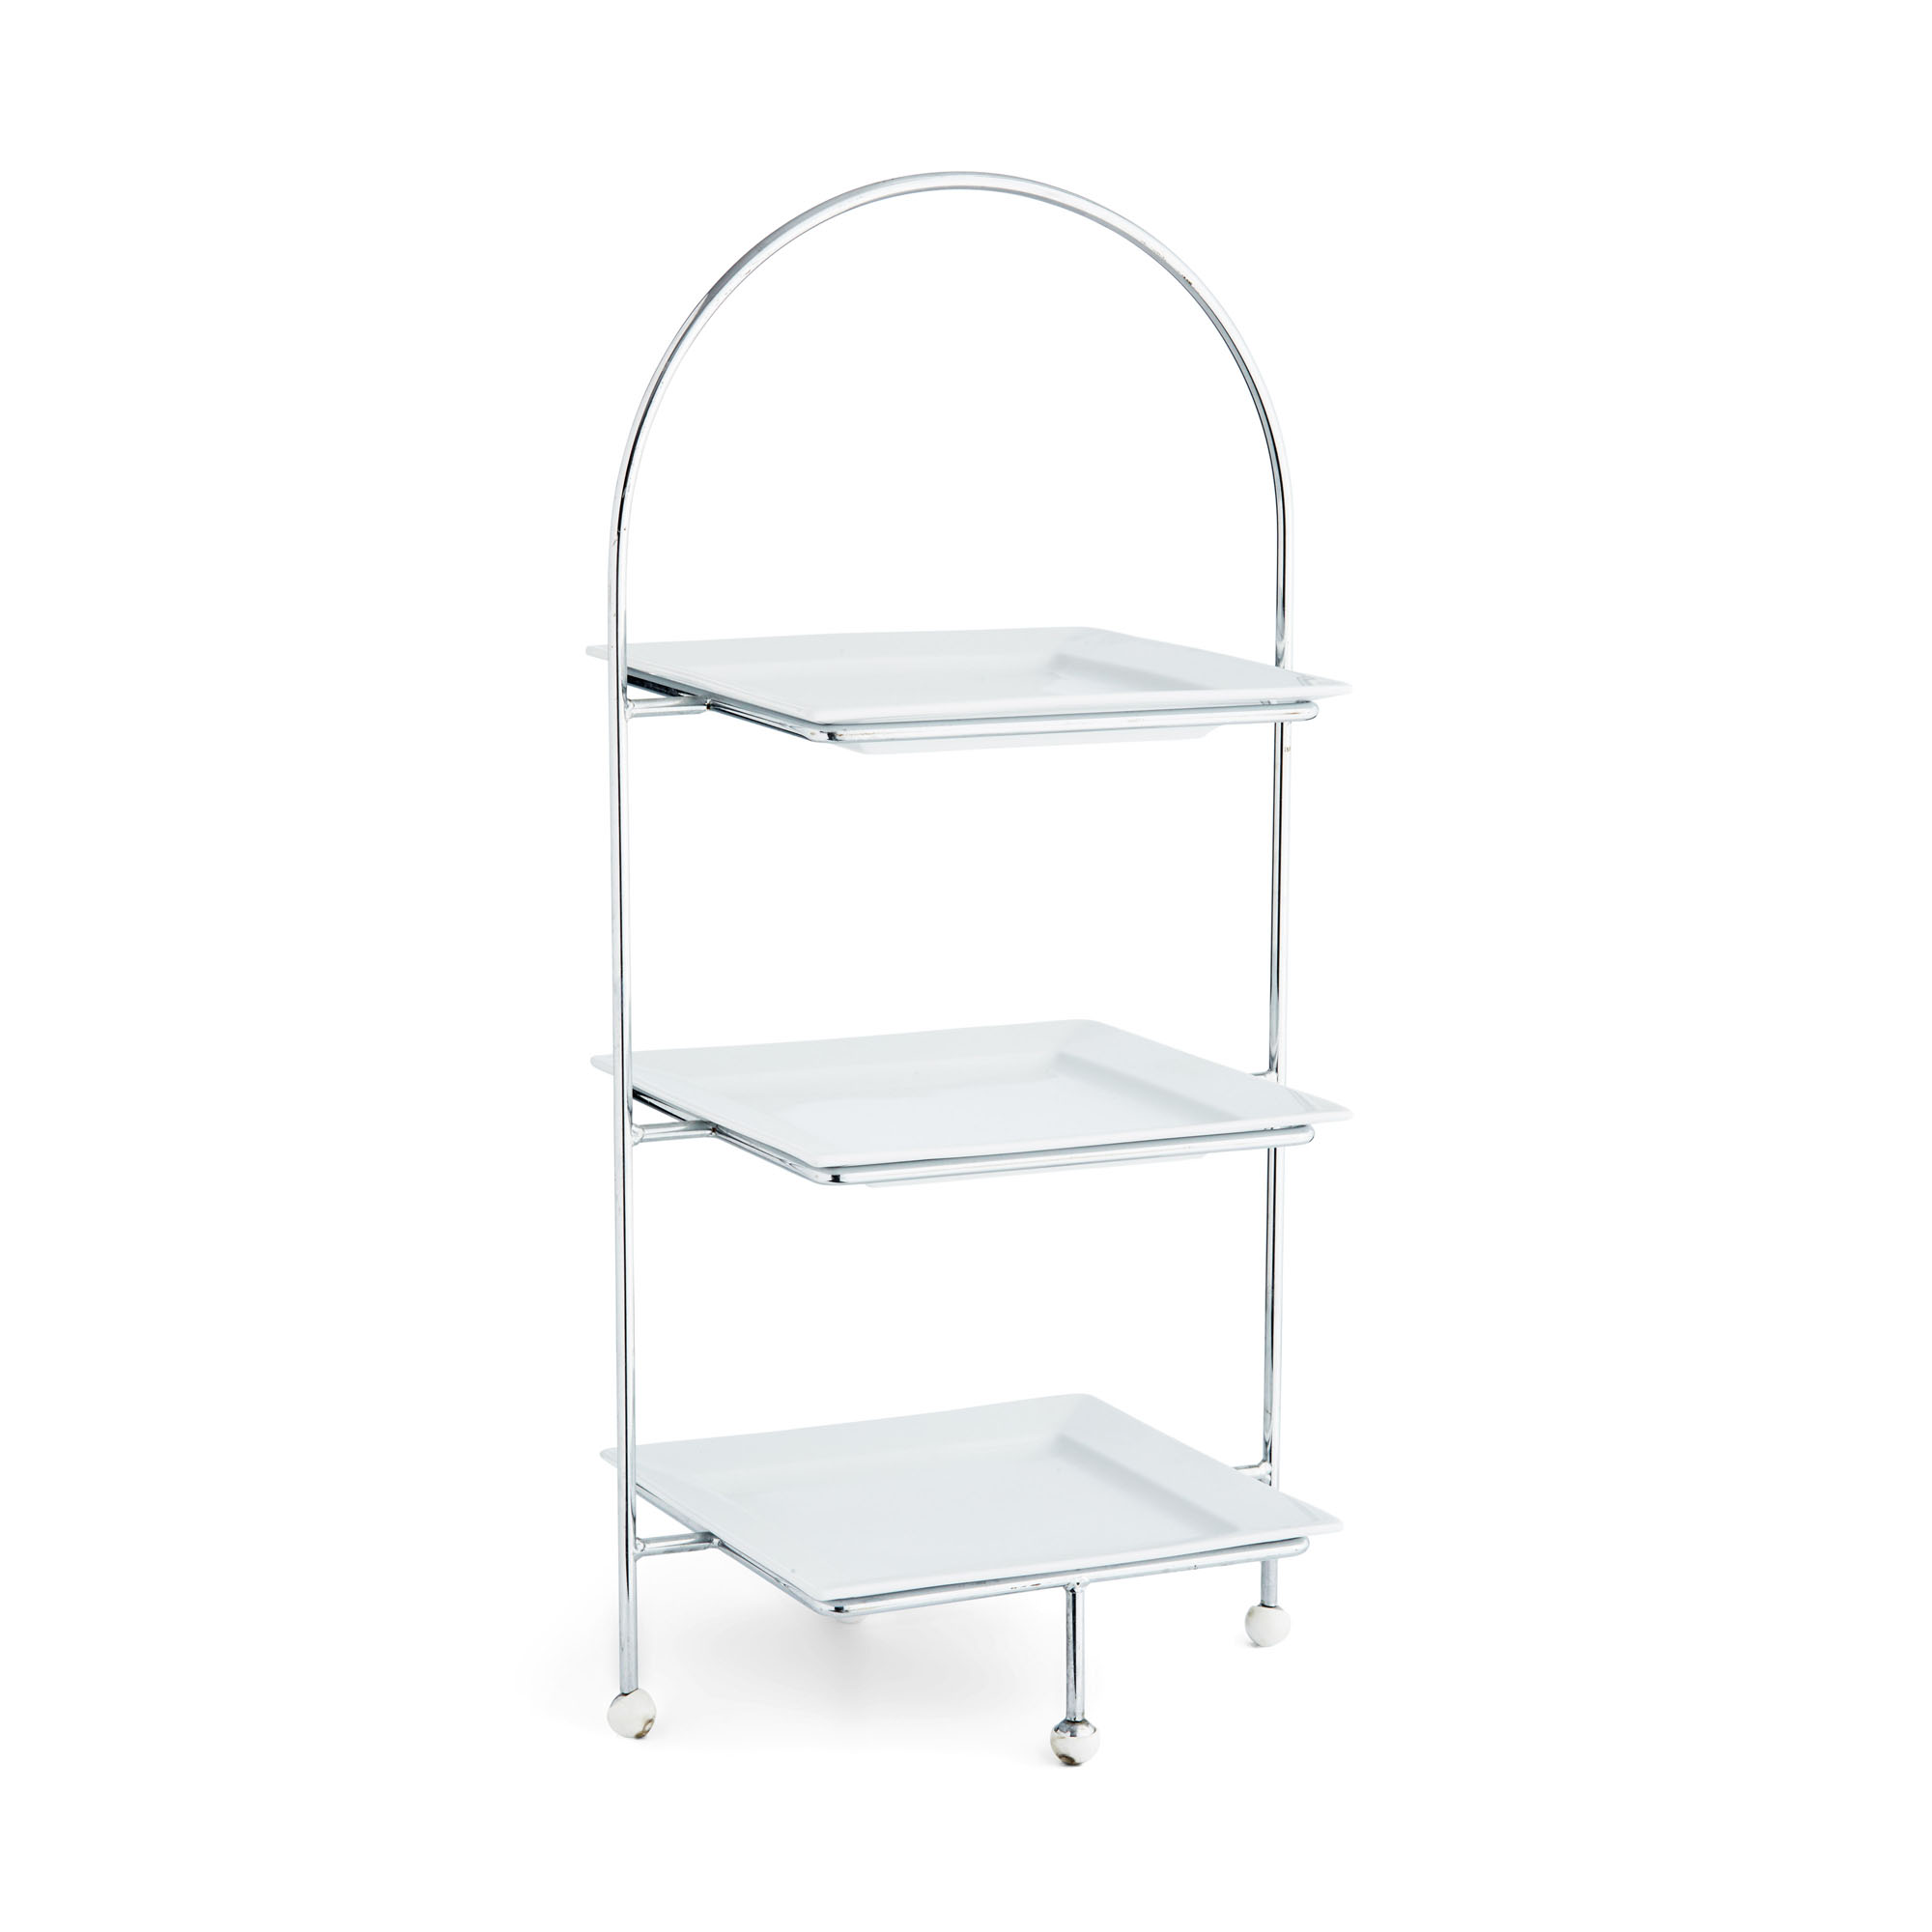 Cake Stand - Square Three Tiered Chrome Stand for Hire ...